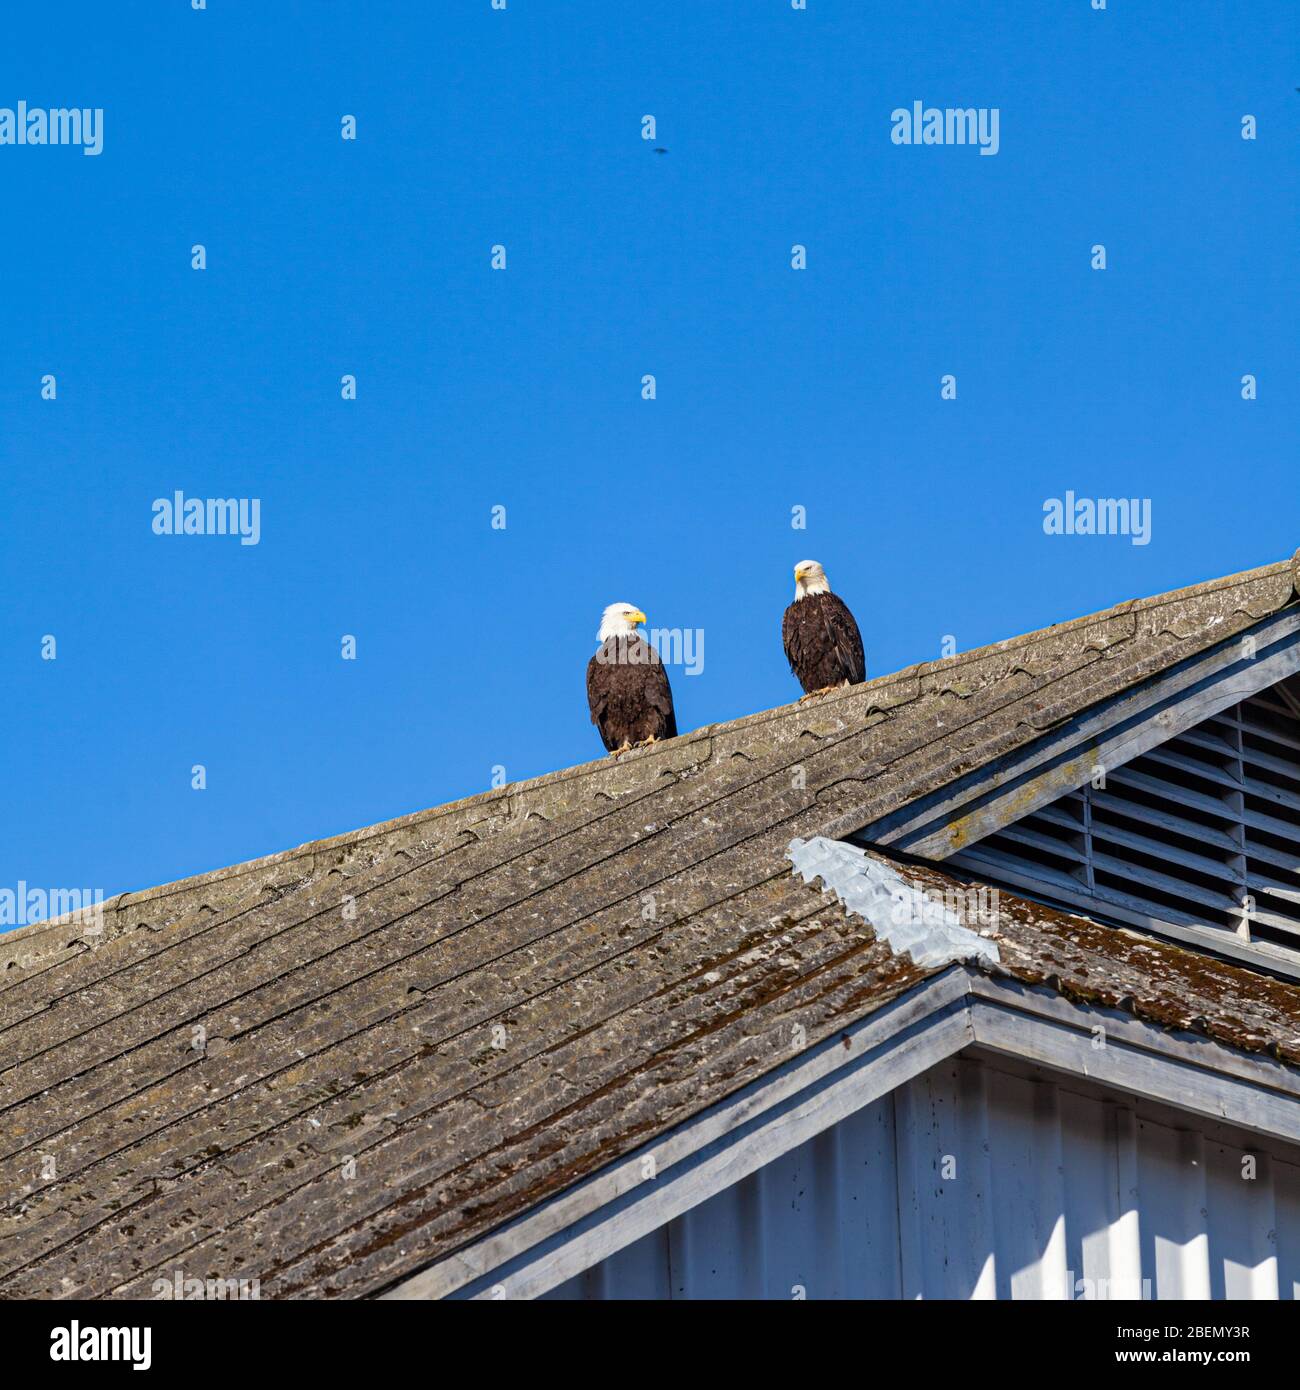 Pair of Bald Eagles on a shed roof in Steveston British Columbia Canada Stock Photo